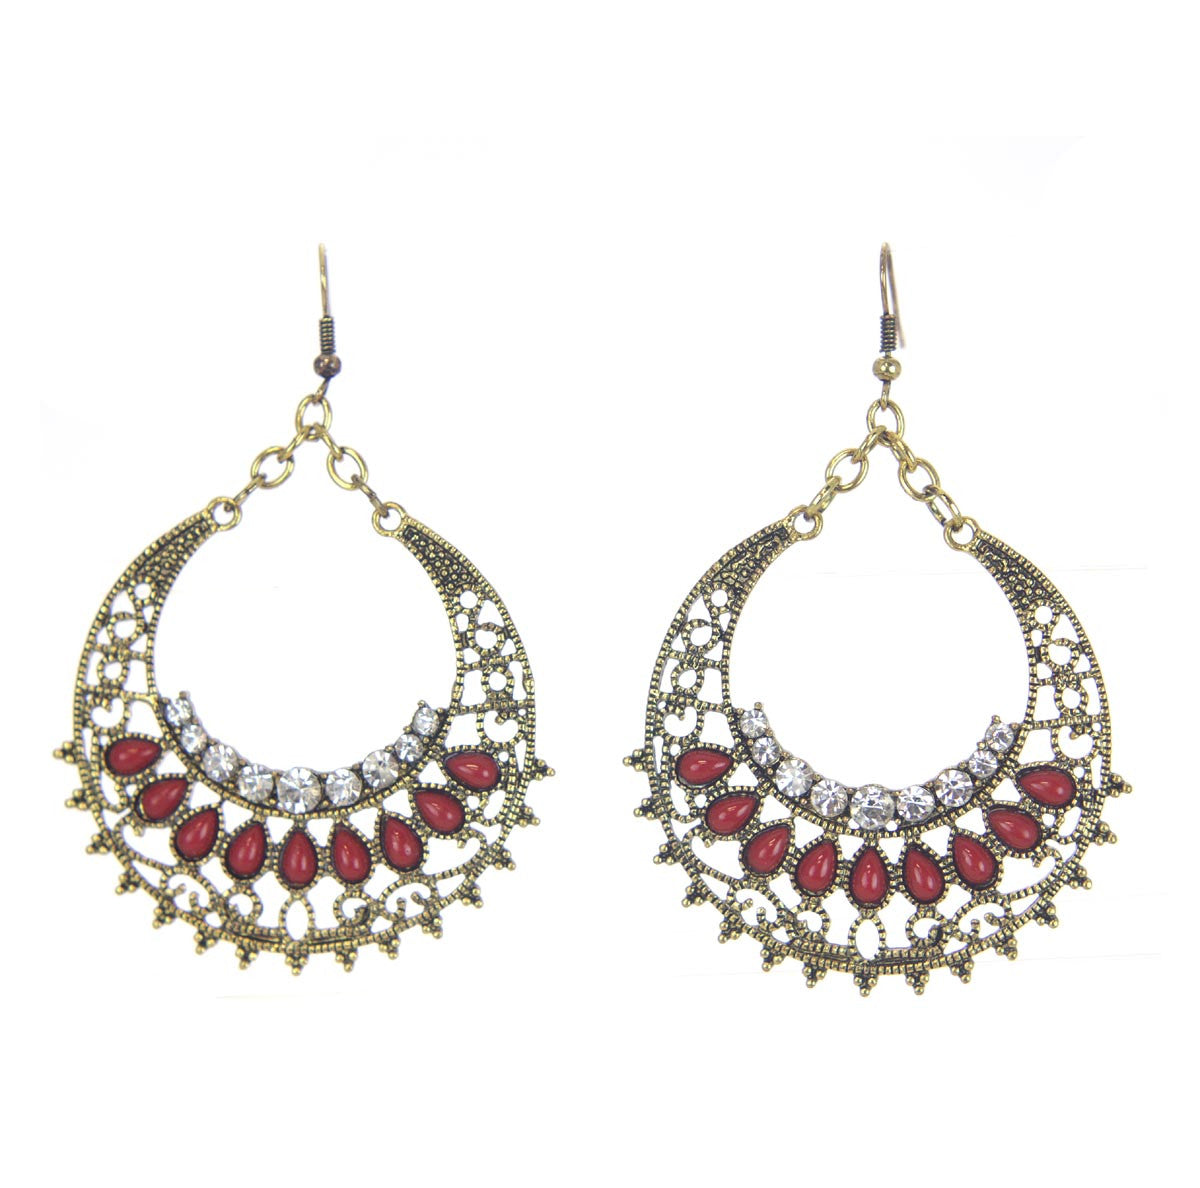 Antique Gold Rhinestone Earrings with Red Beads